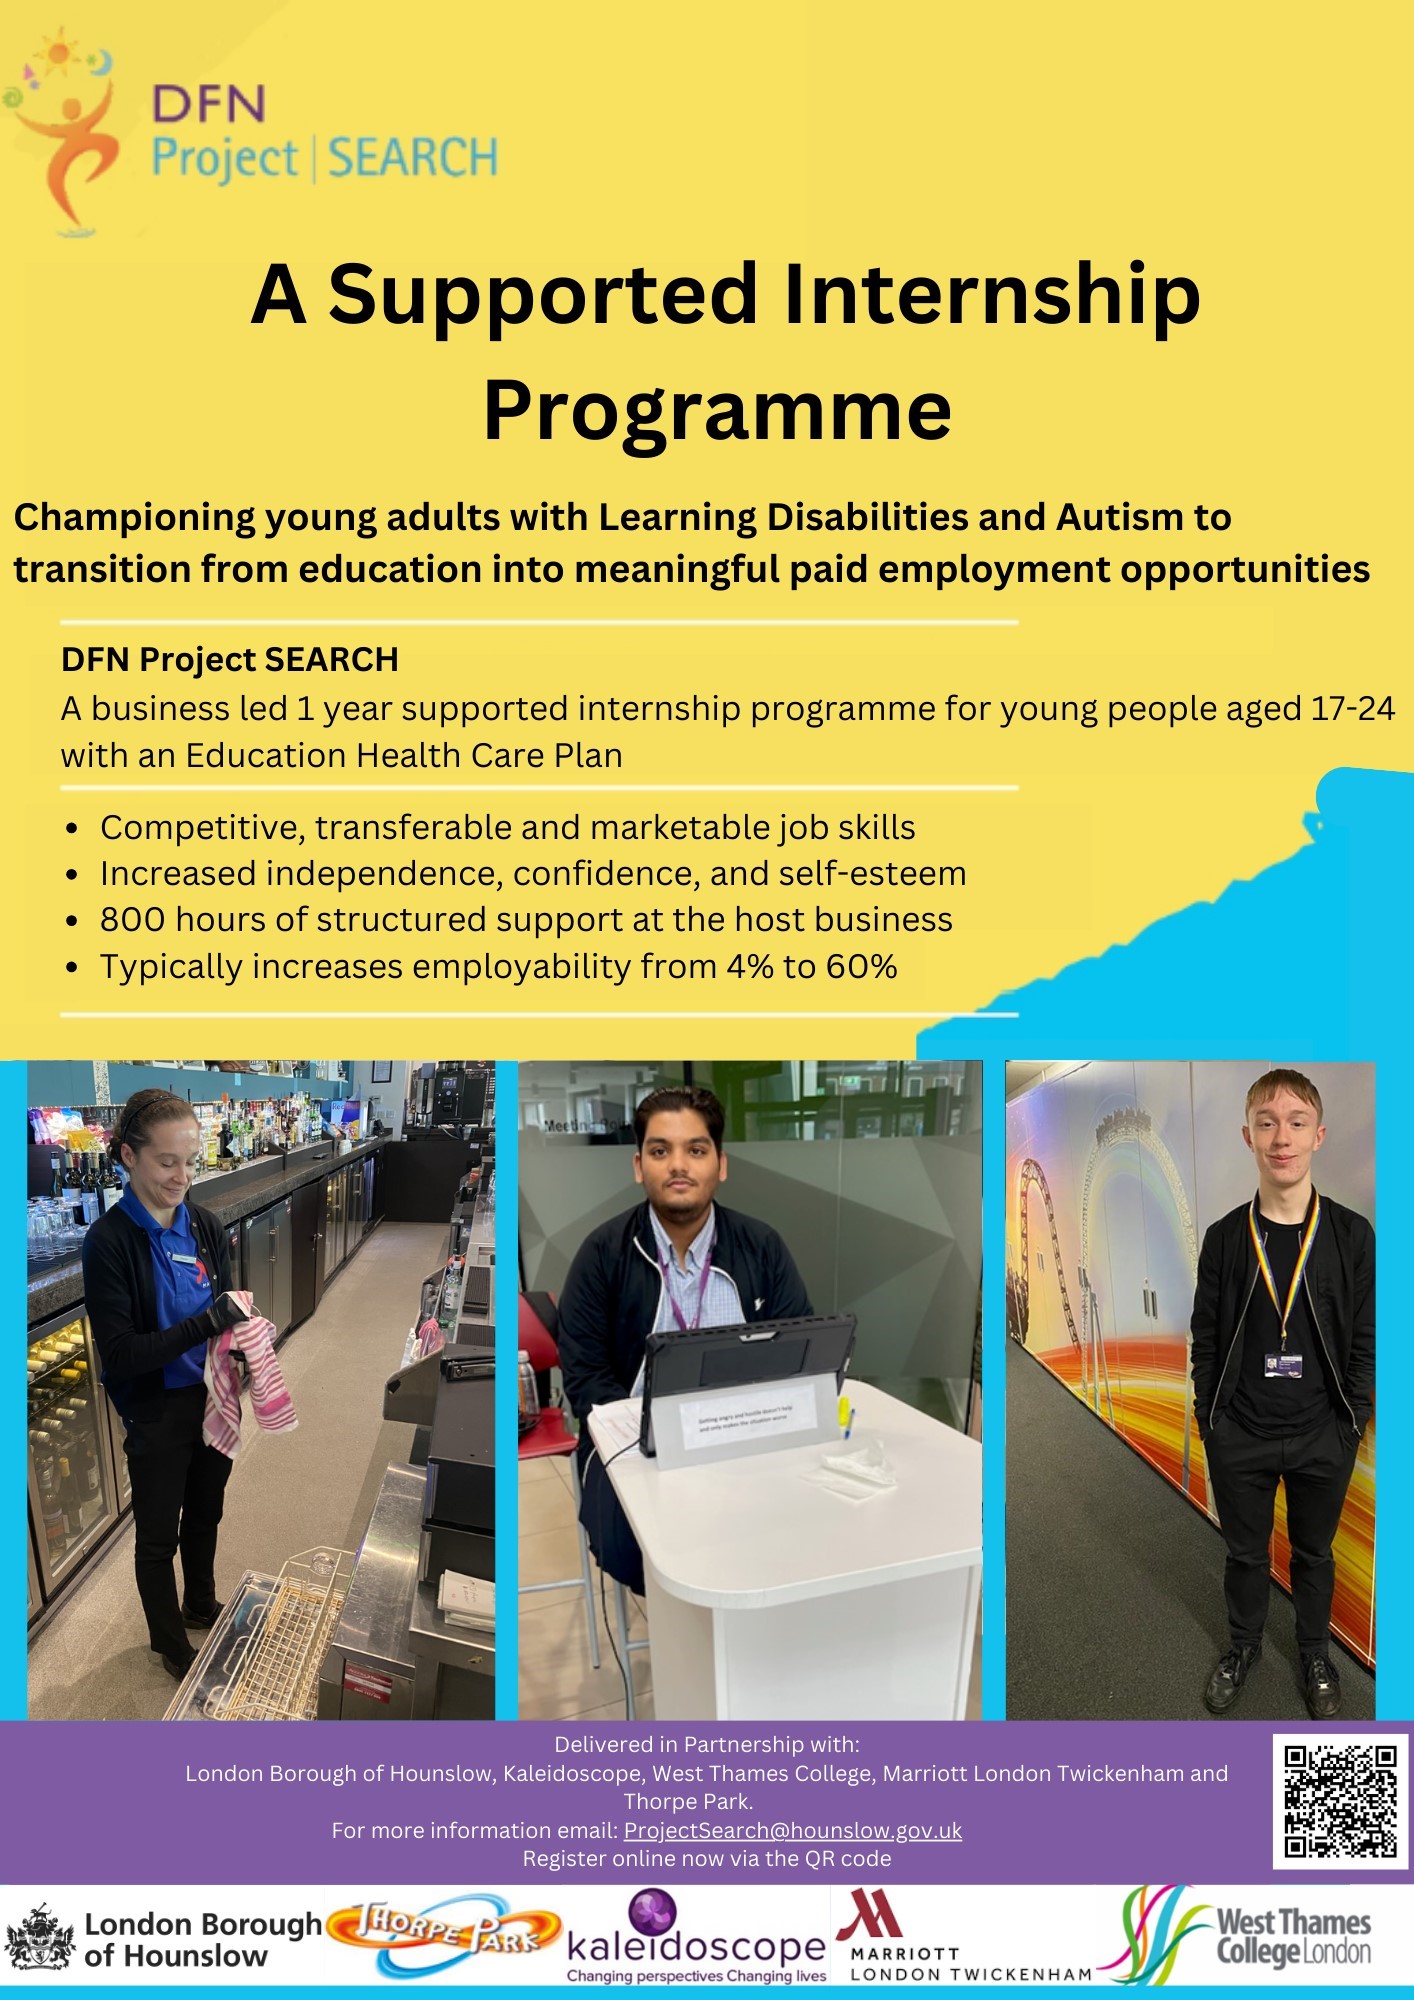 A poster from the Project Search team regarding the Supported Internship programme